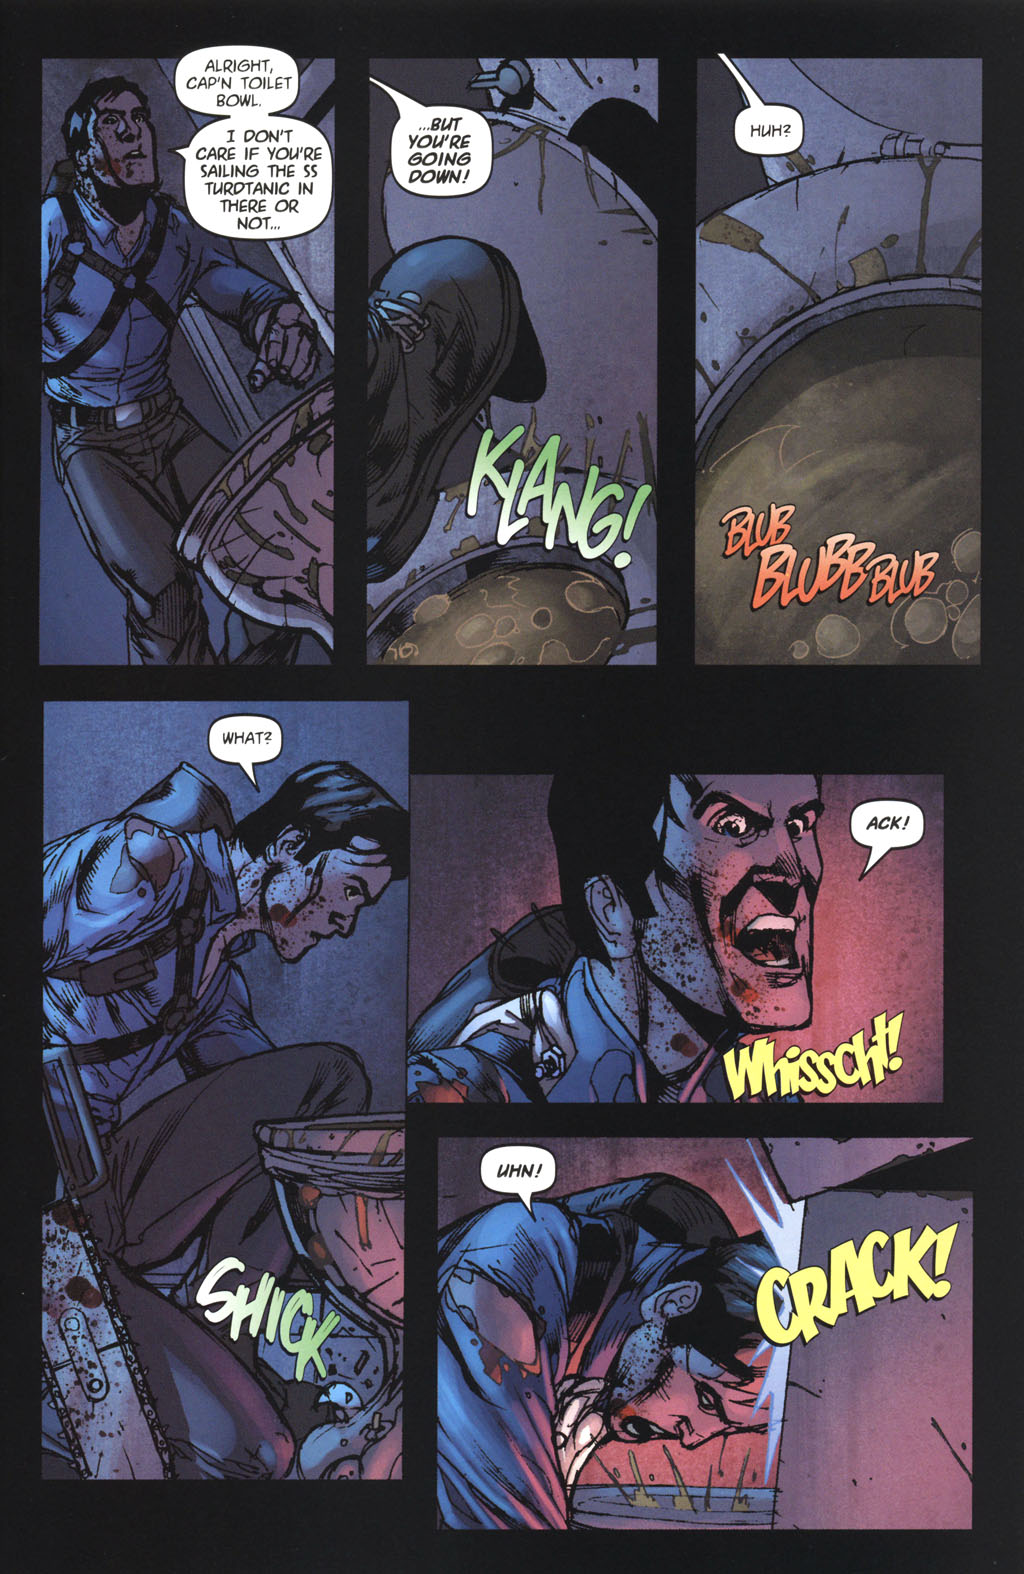 Army of Darkness (2006) Issue #6 #2 - English 23